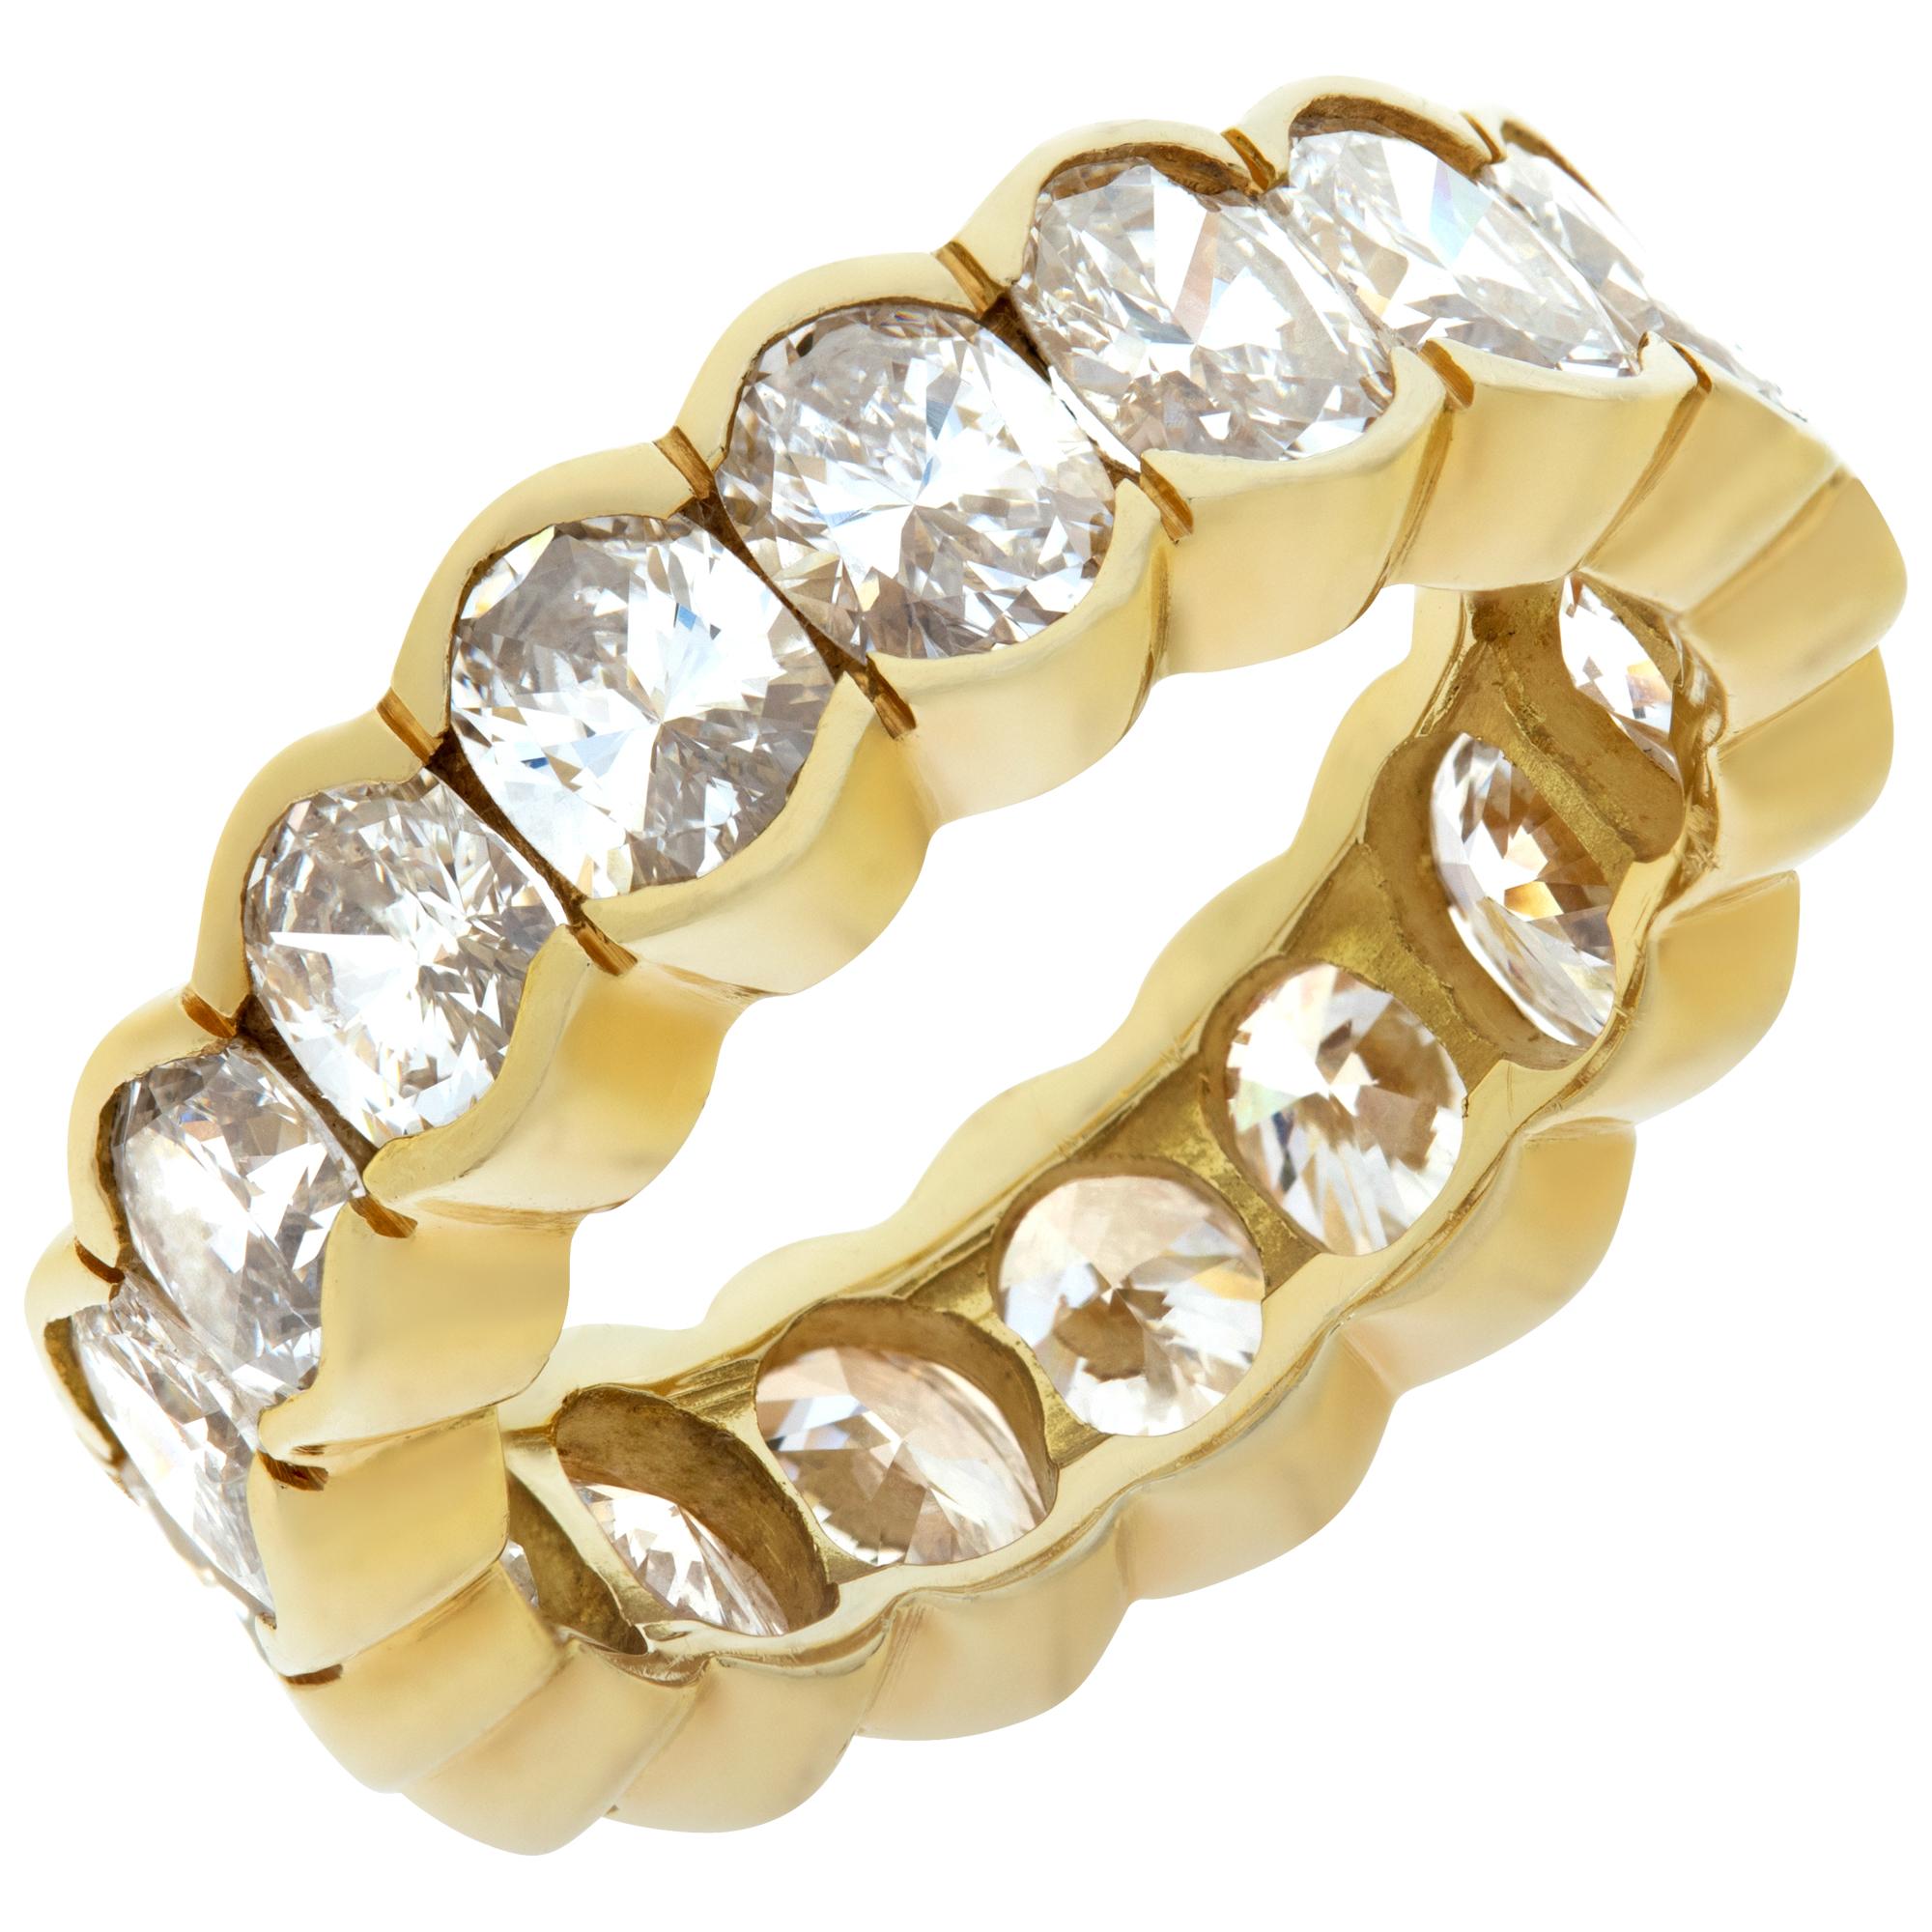 Oval Diamonds Cut 18k Yellow Gold Eternity Band In Excellent Condition For Sale In Surfside, FL